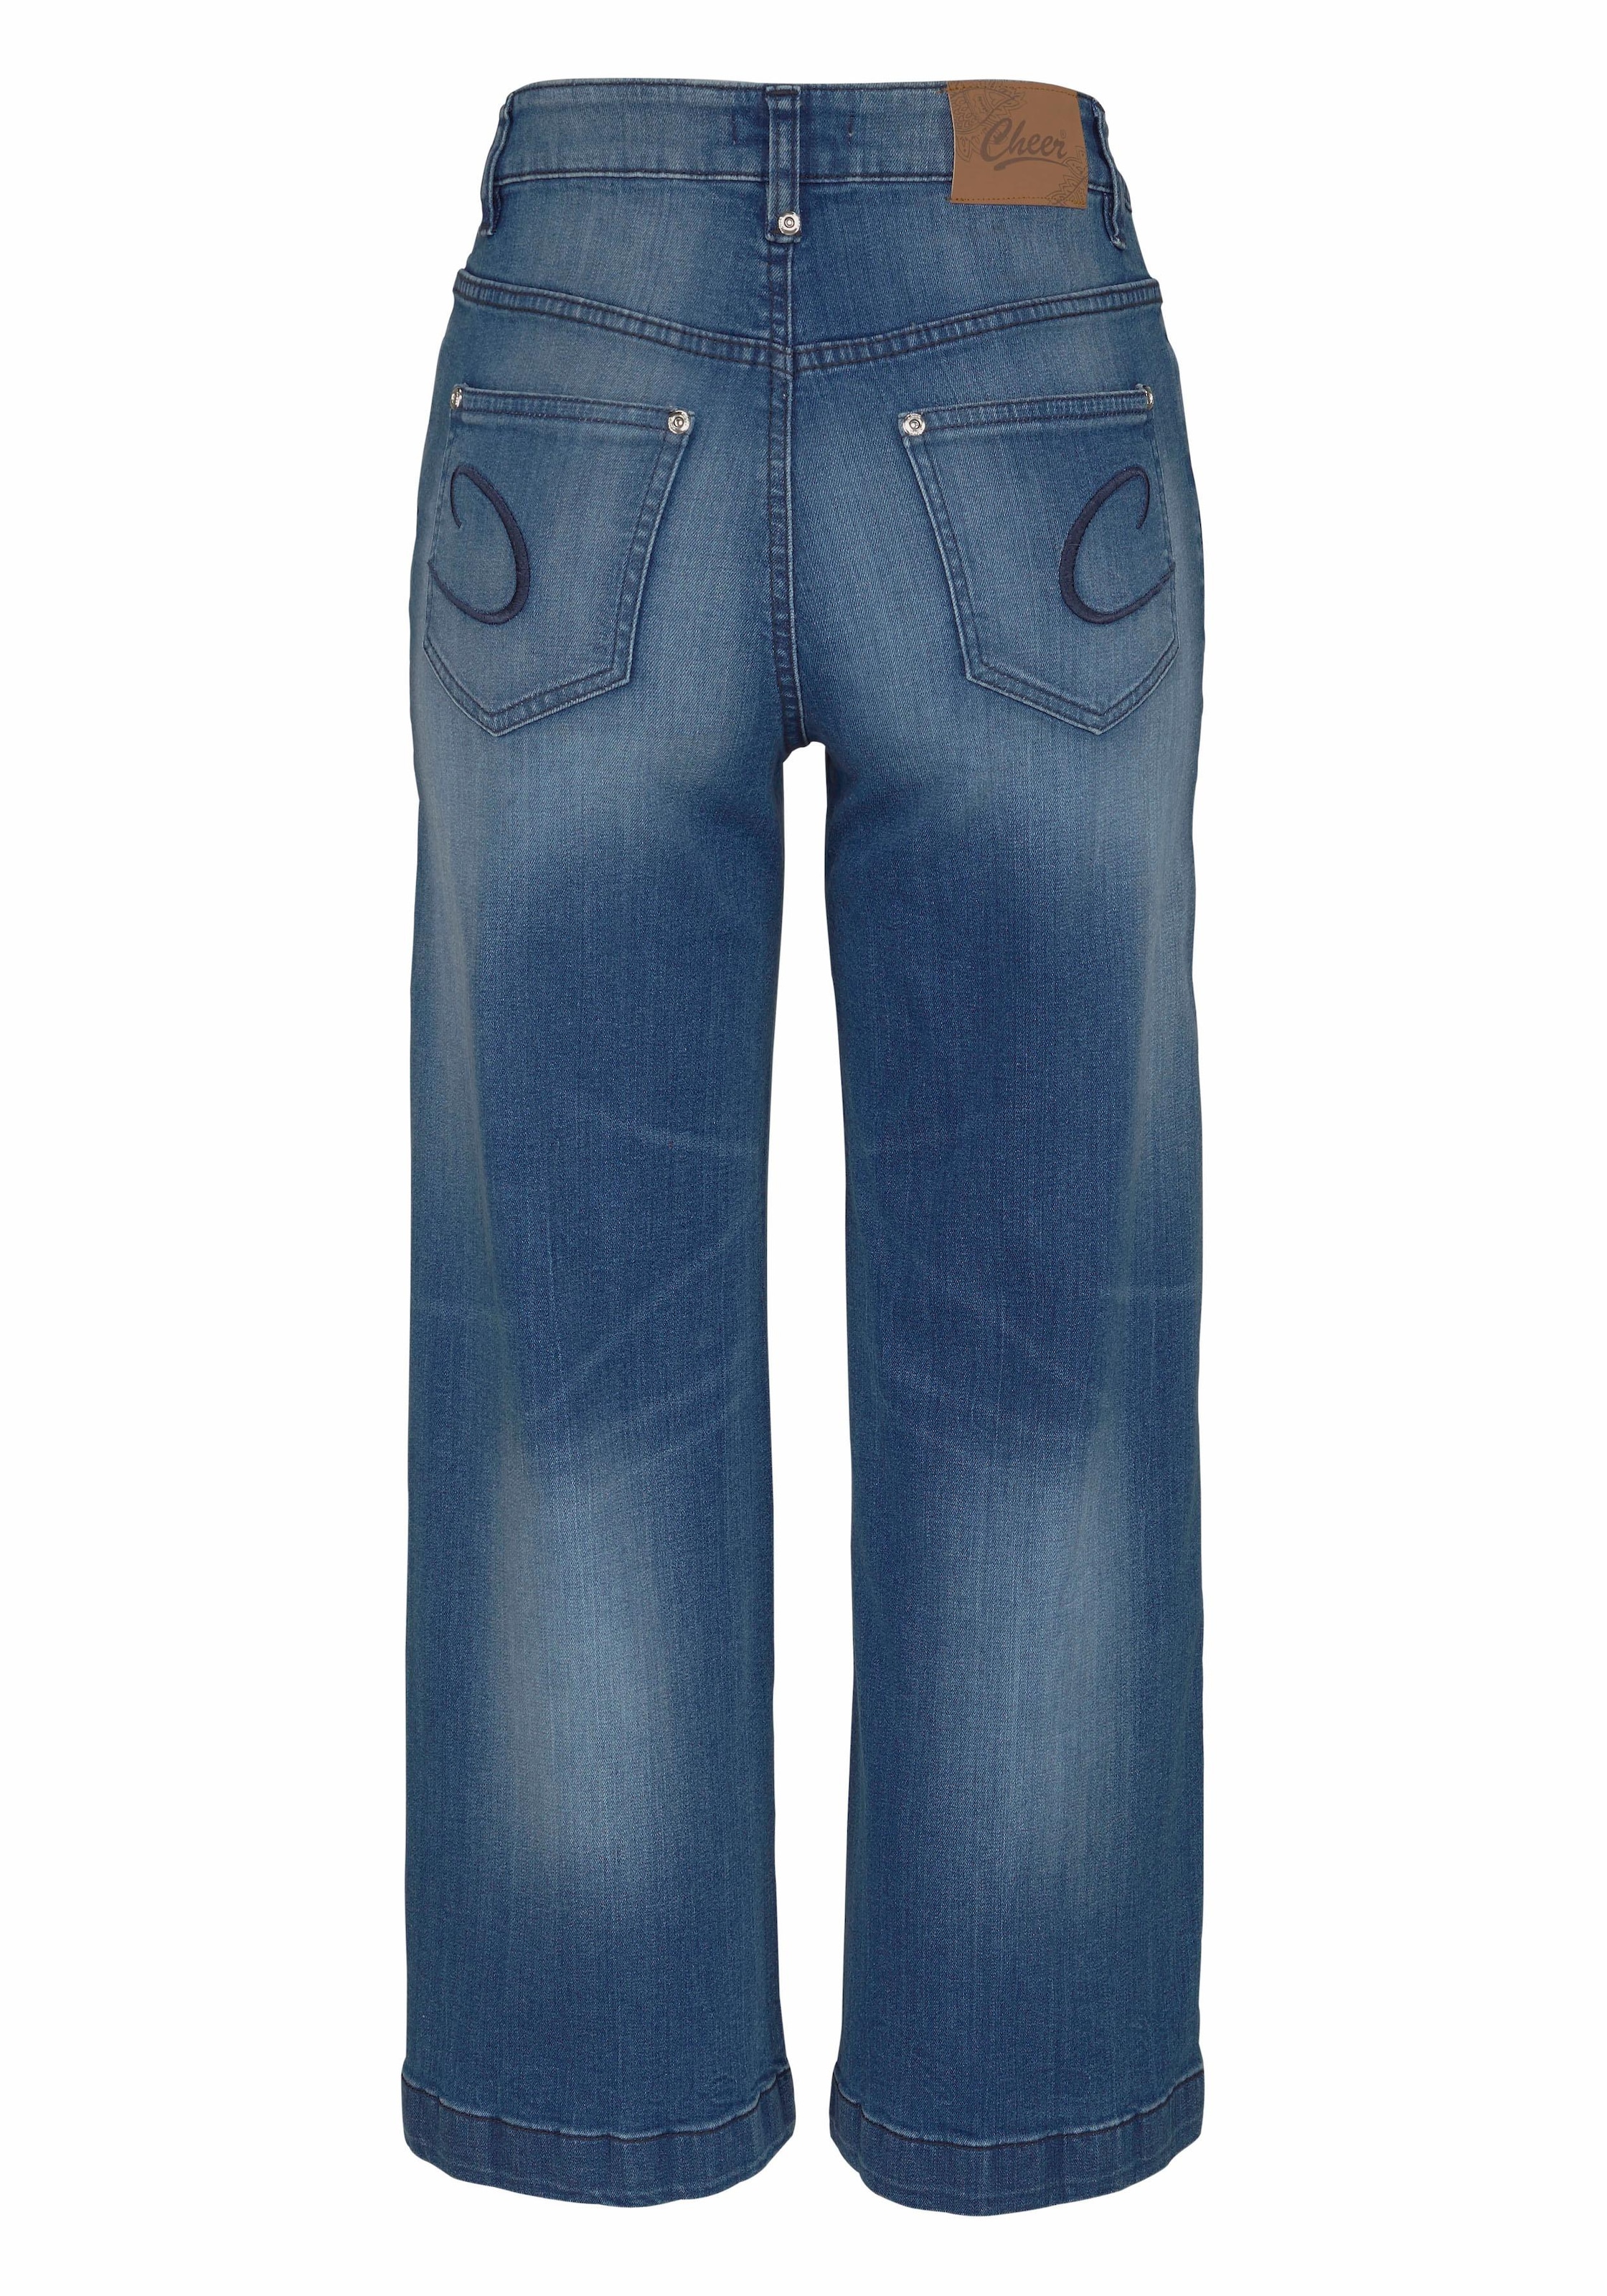 Aniston CASUAL 7/8-Jeans, in Used-Waschung shoppen